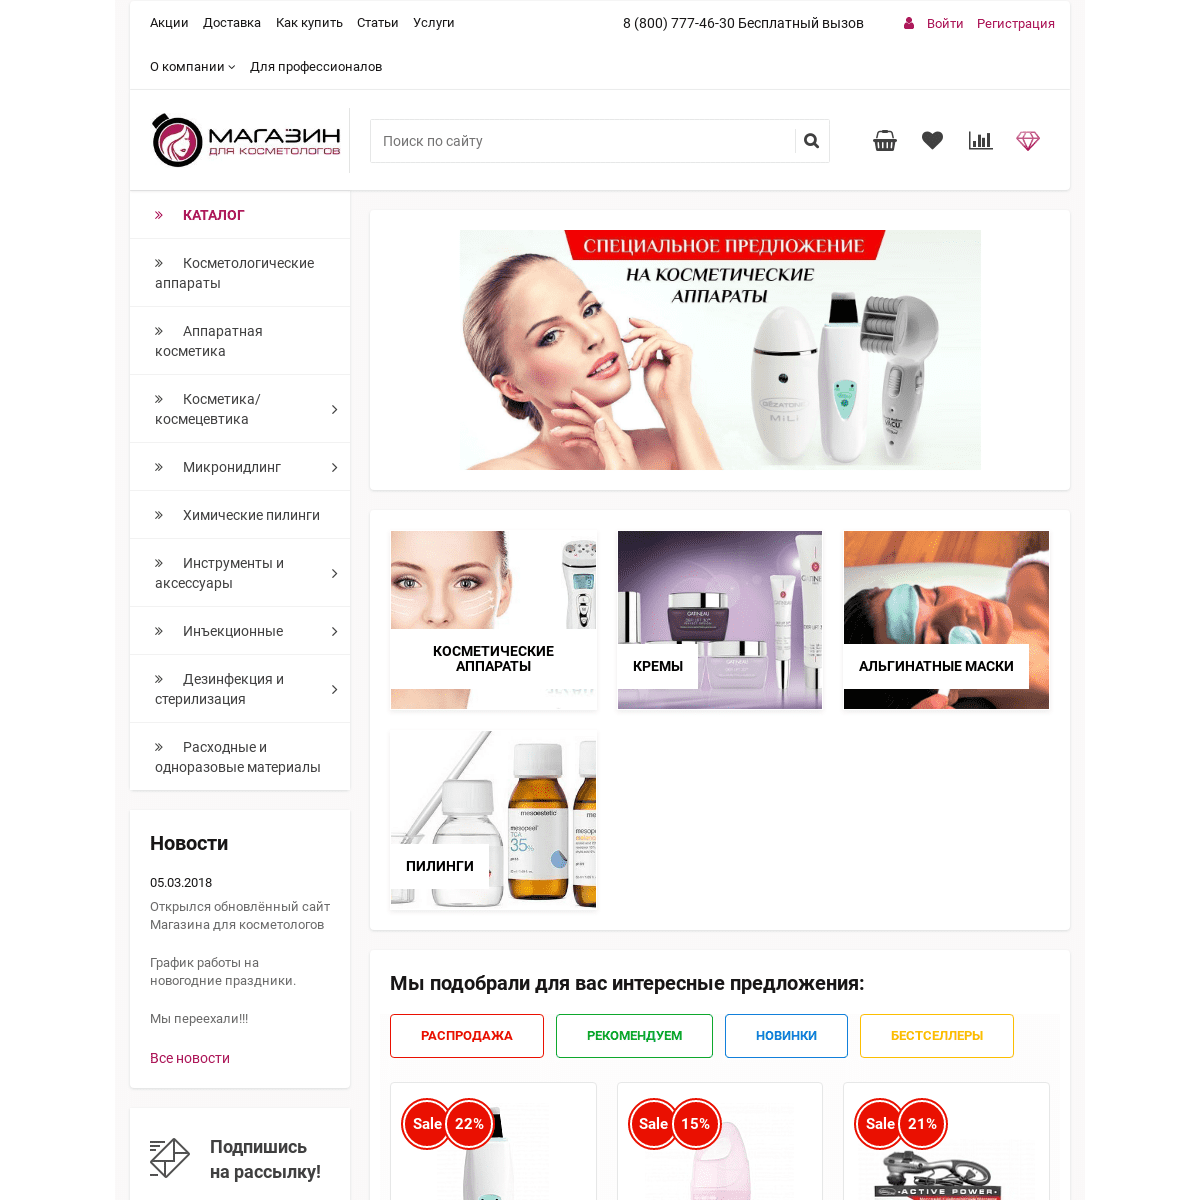 A complete backup of https://cosmetology-shop.ru